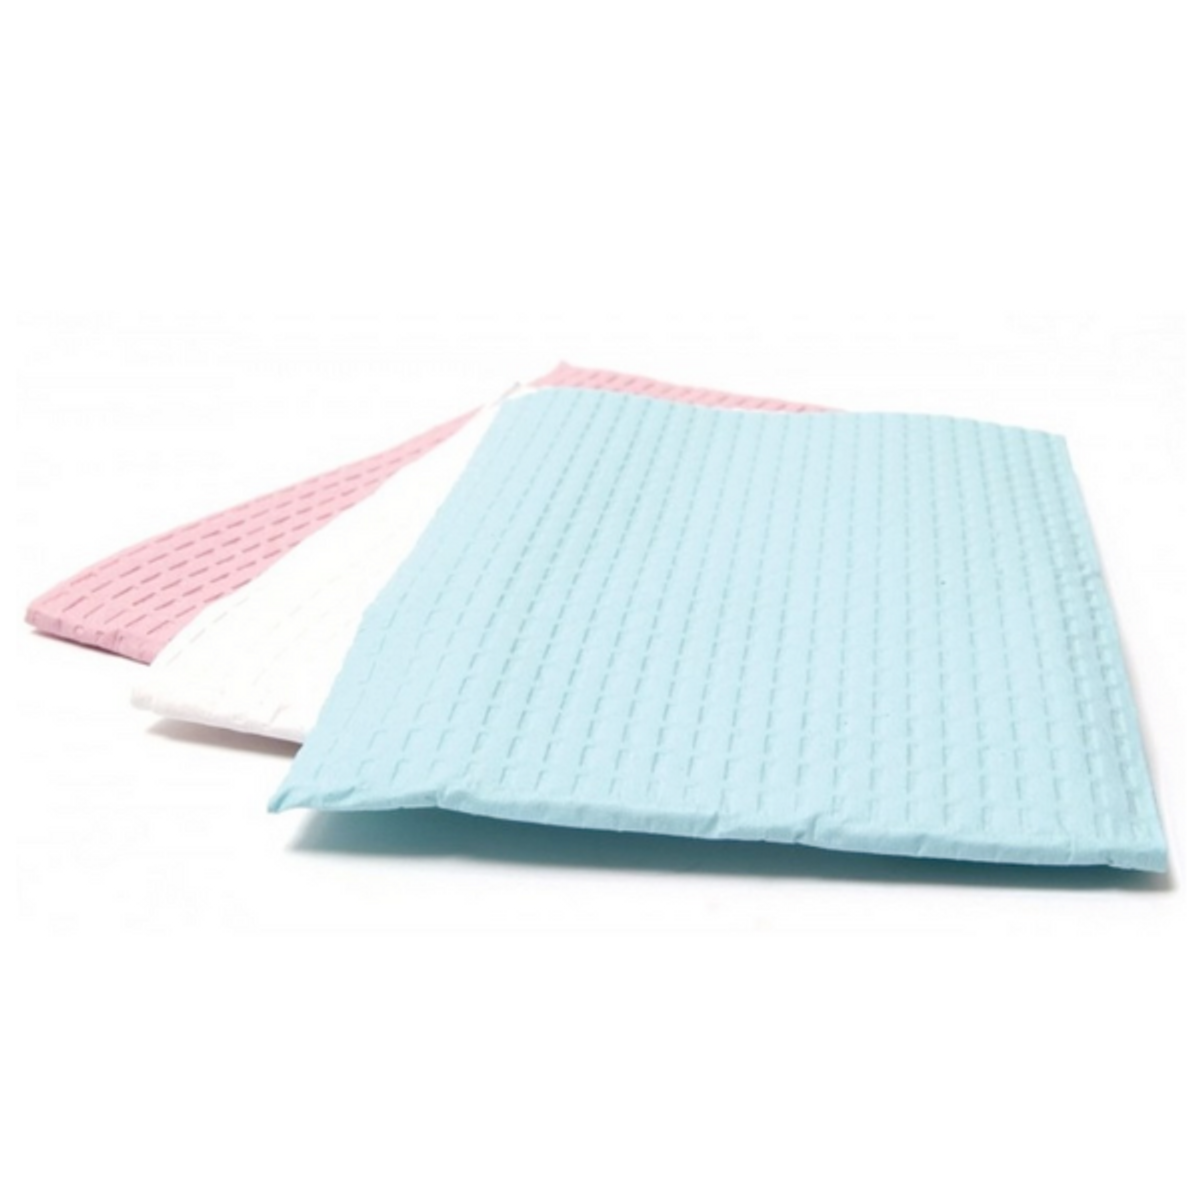 Avalon Papers Poly Towels 3-Ply Tissue & Poly